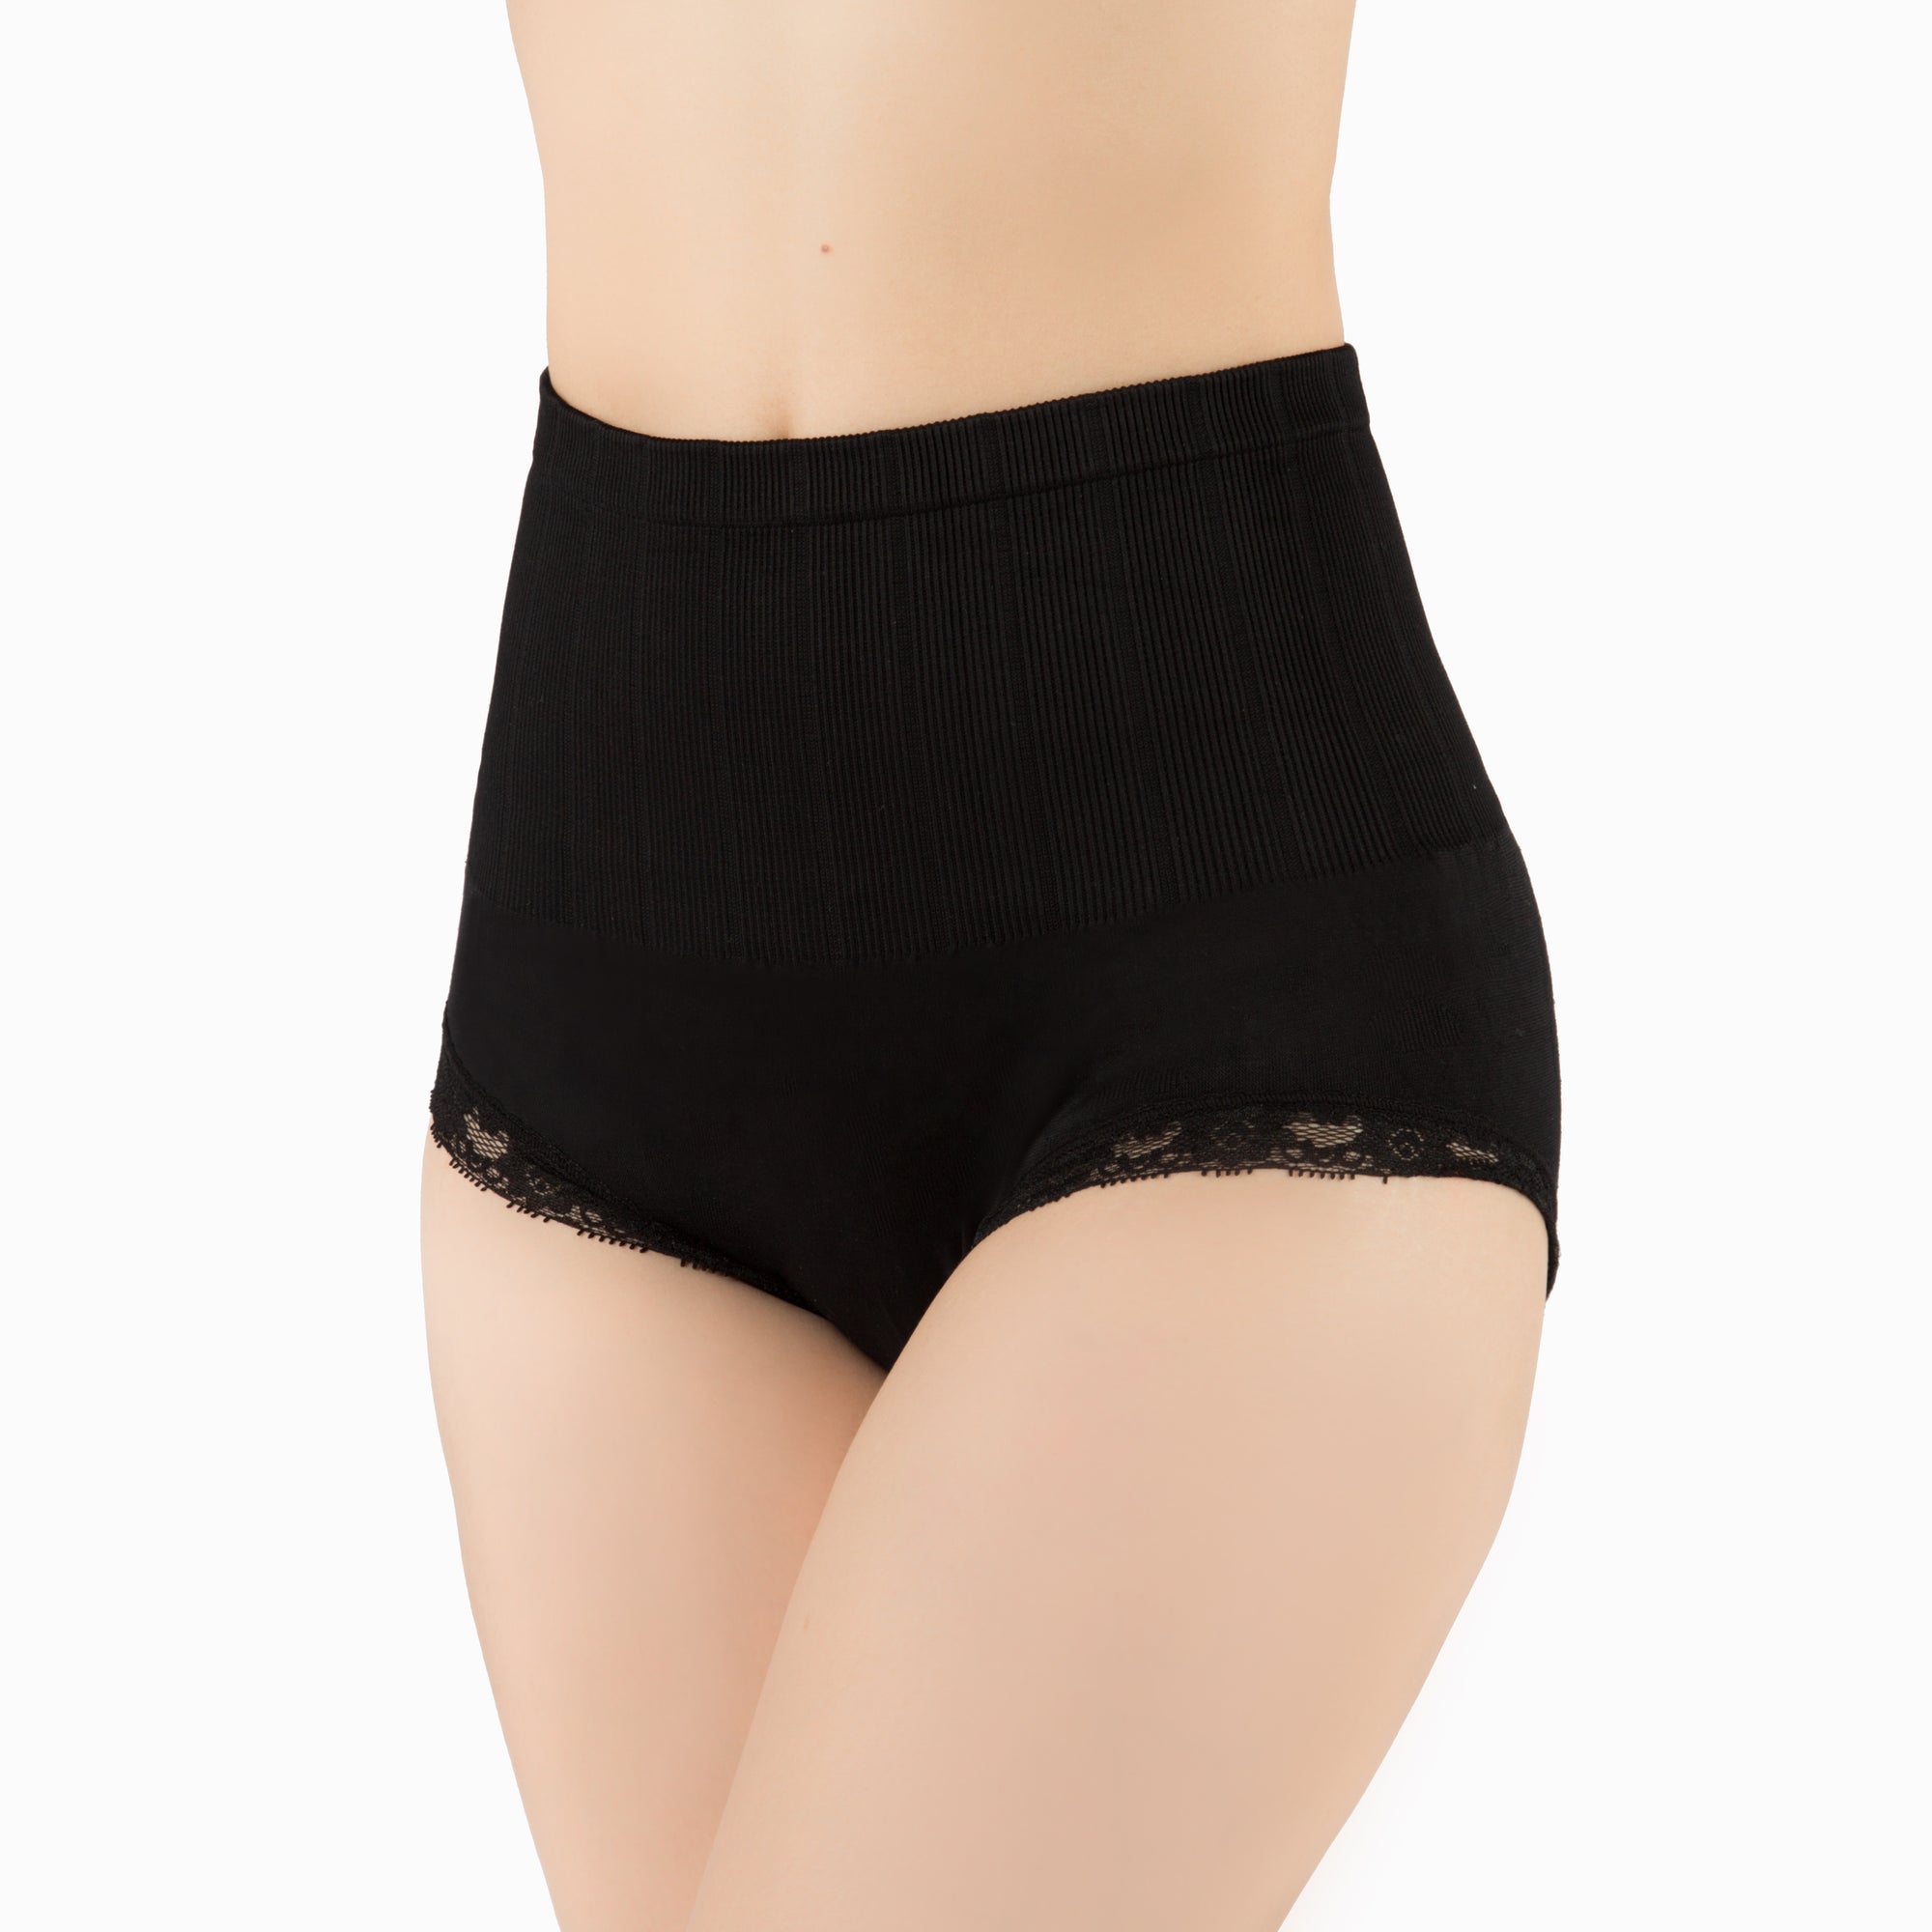 Buy EVERYDAY CONTROL BRIEF online at Intimo